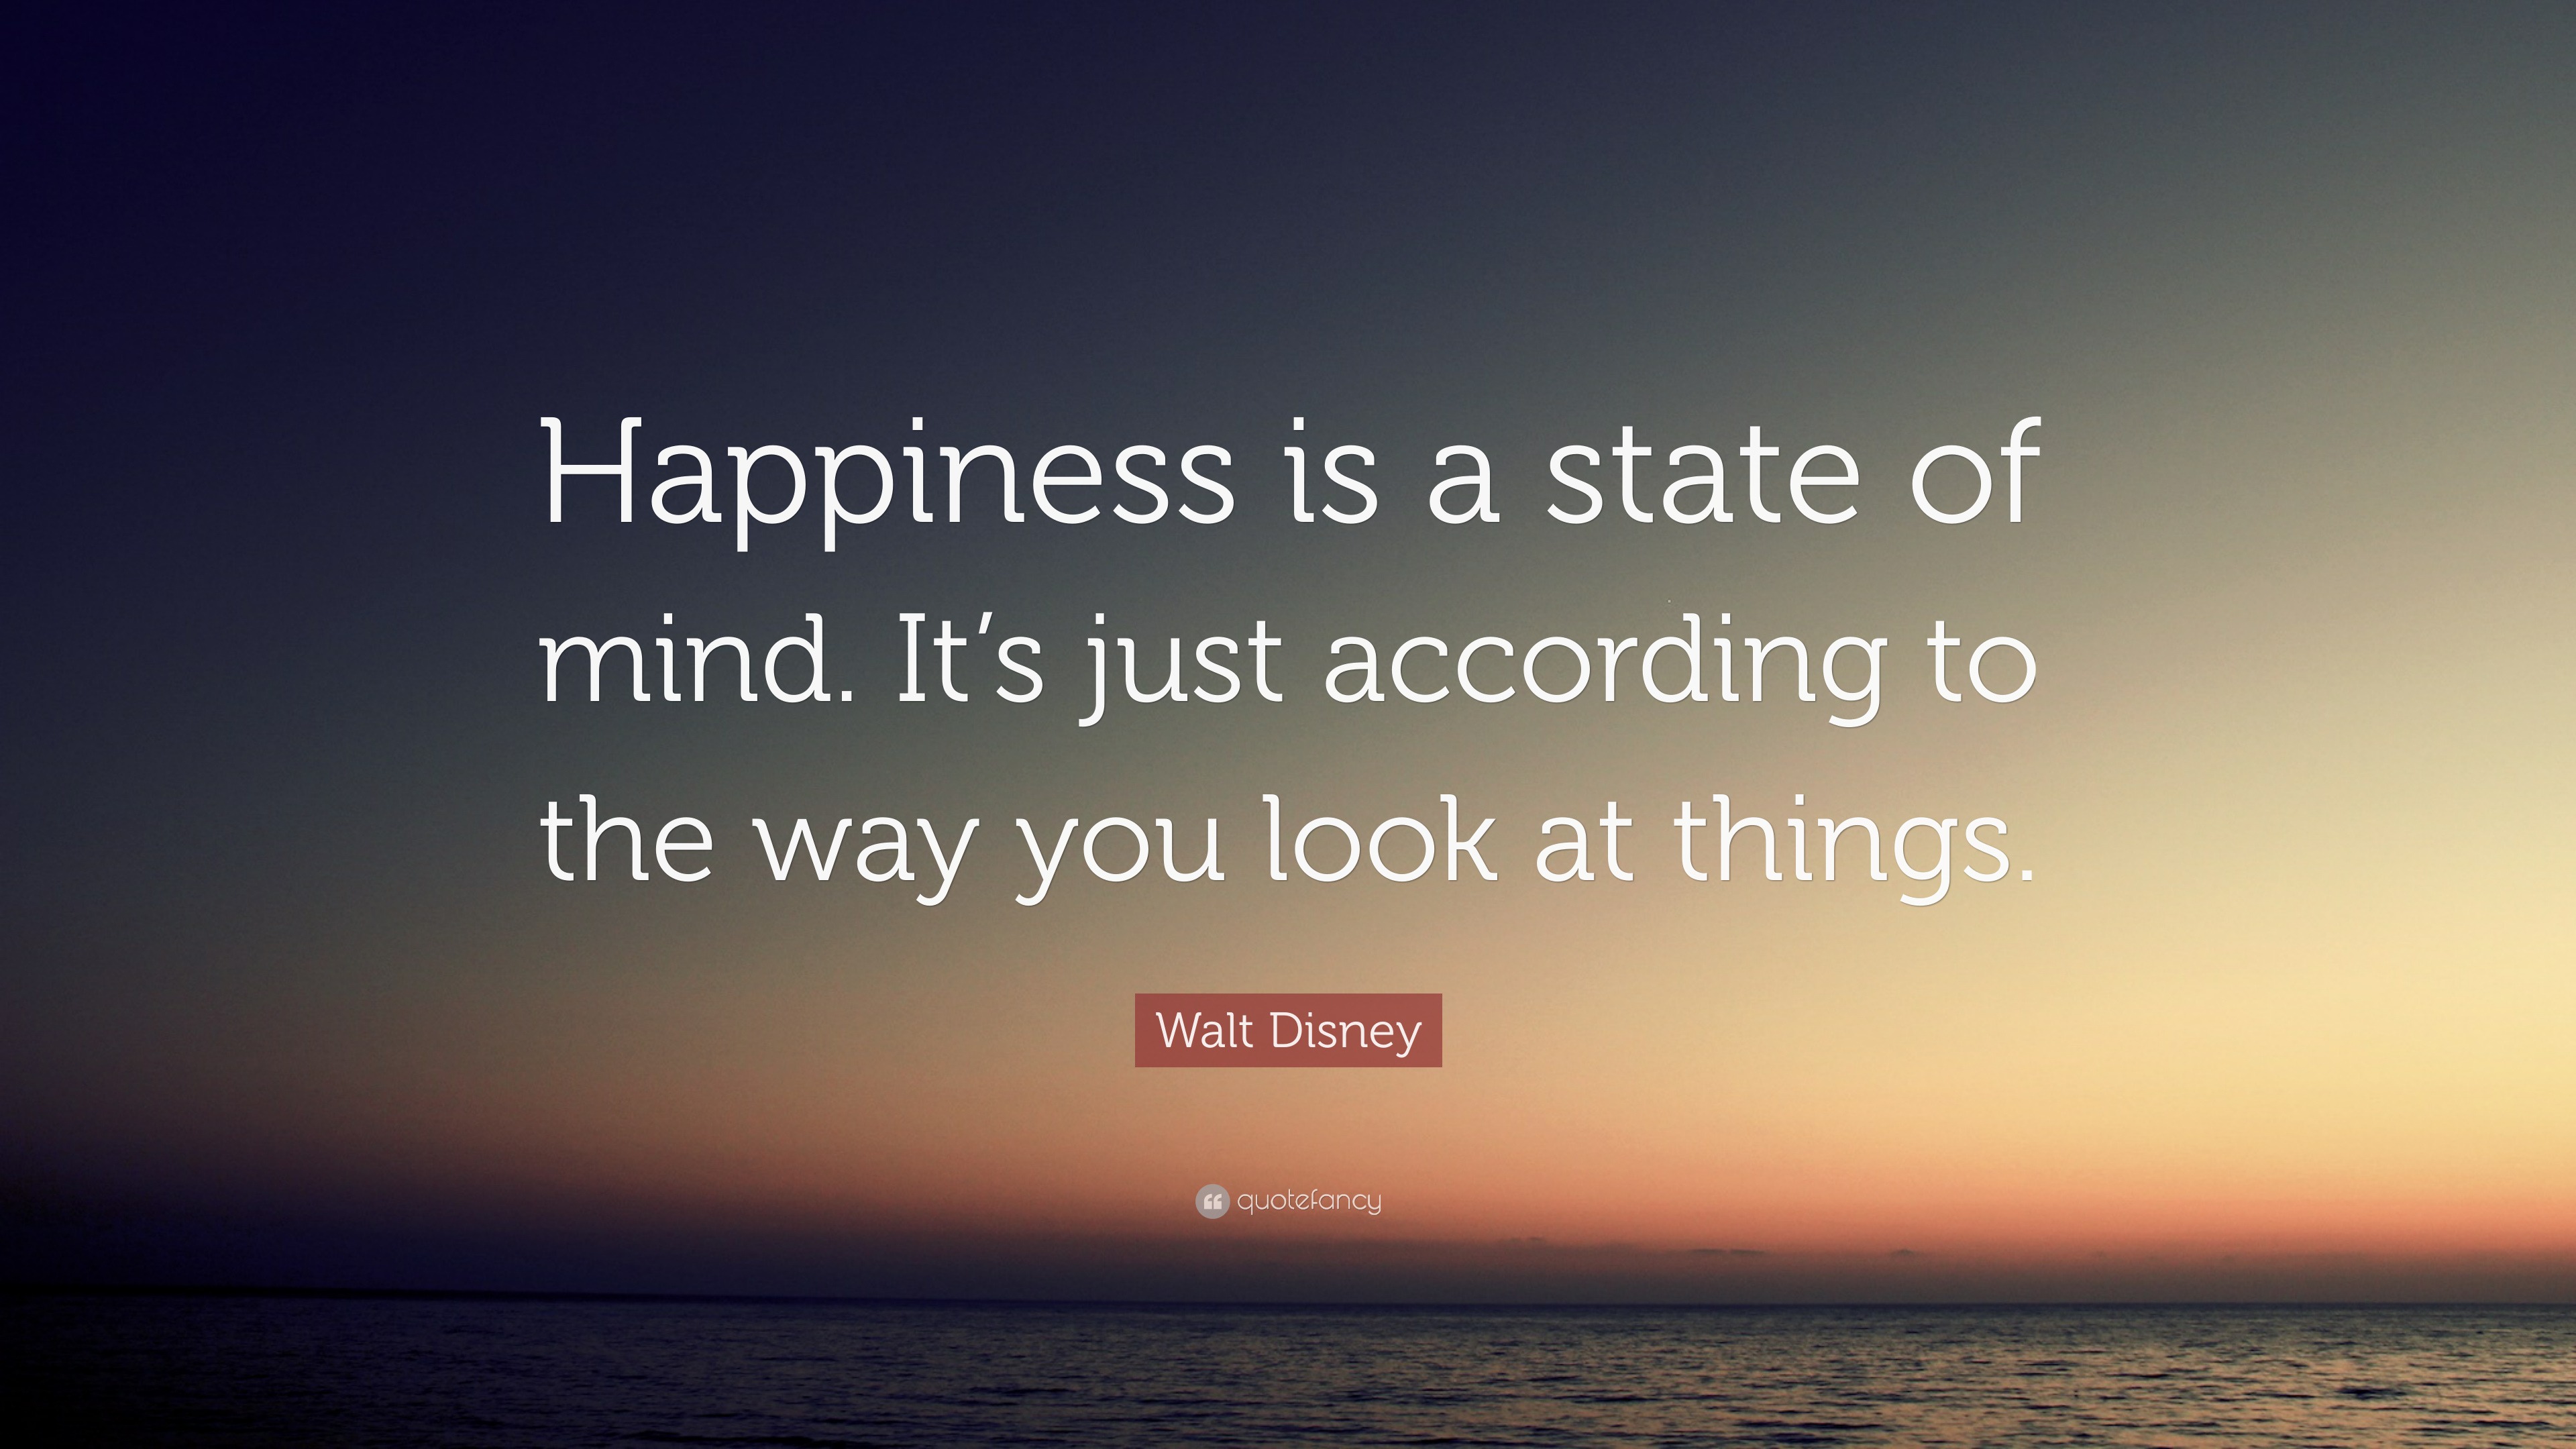 Walt Disney Quote: “Happiness is a state of mind. It’s just according